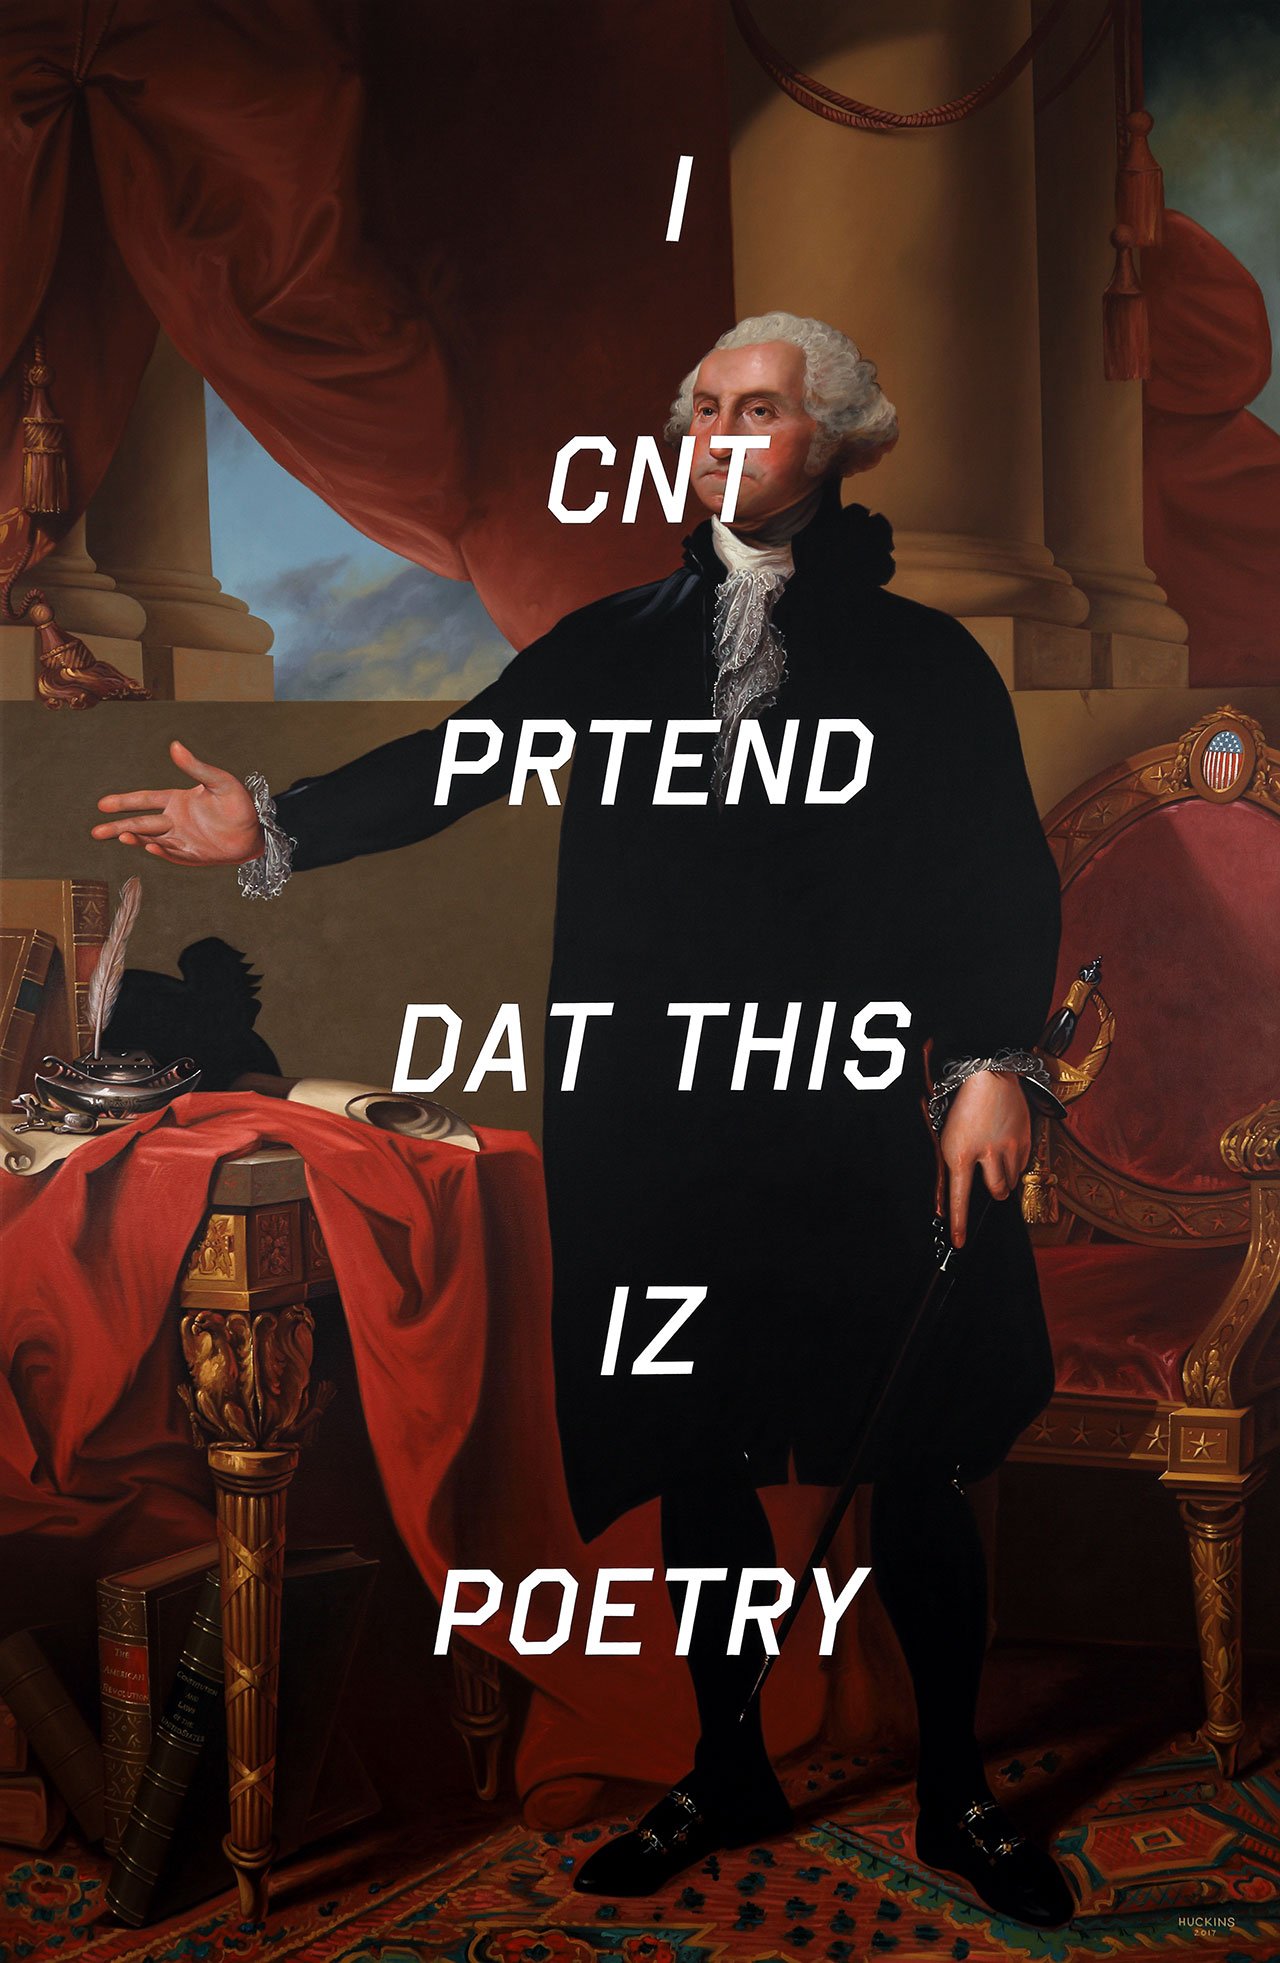 Shawn Huckins, George Washington (The Lansdowne Portrait): I Can’t Pretend That This Is Poetry, 2017. Acrylic on canvas, 84 x 54 in (213 x 137 cm).